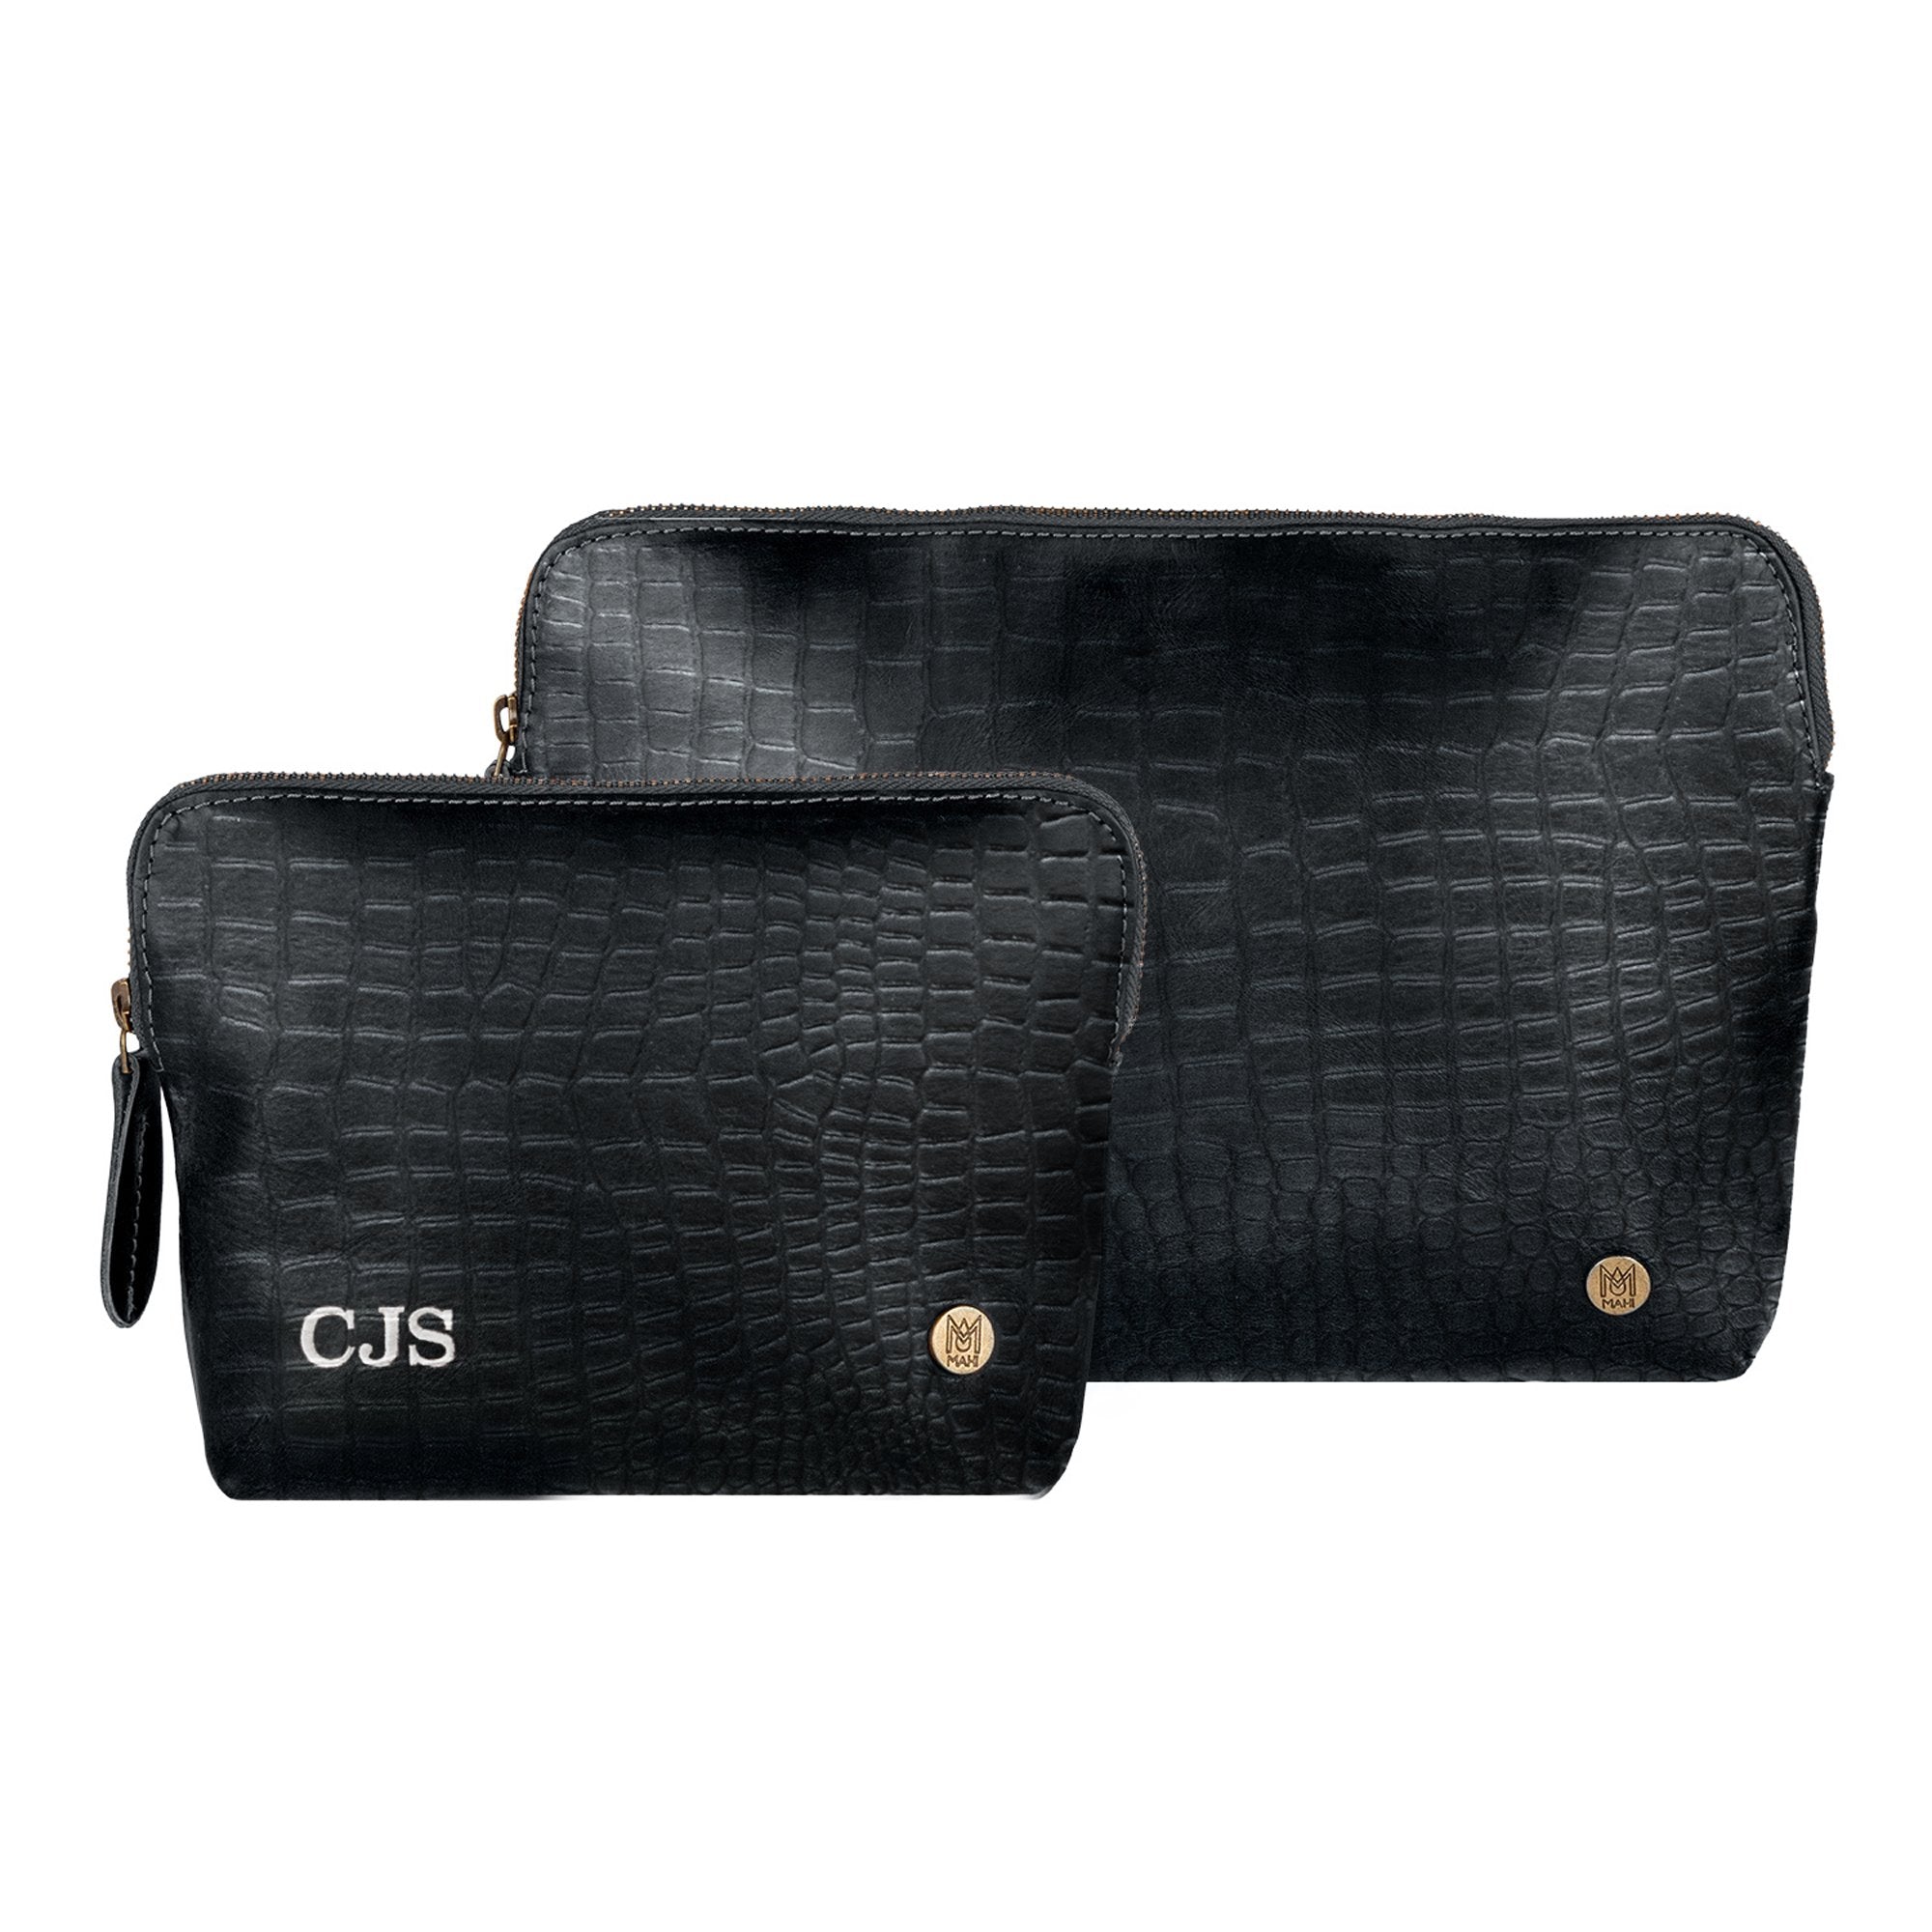 His & Hers Personalized Leather Wallet & Purse Set in Black – MAHI Leather